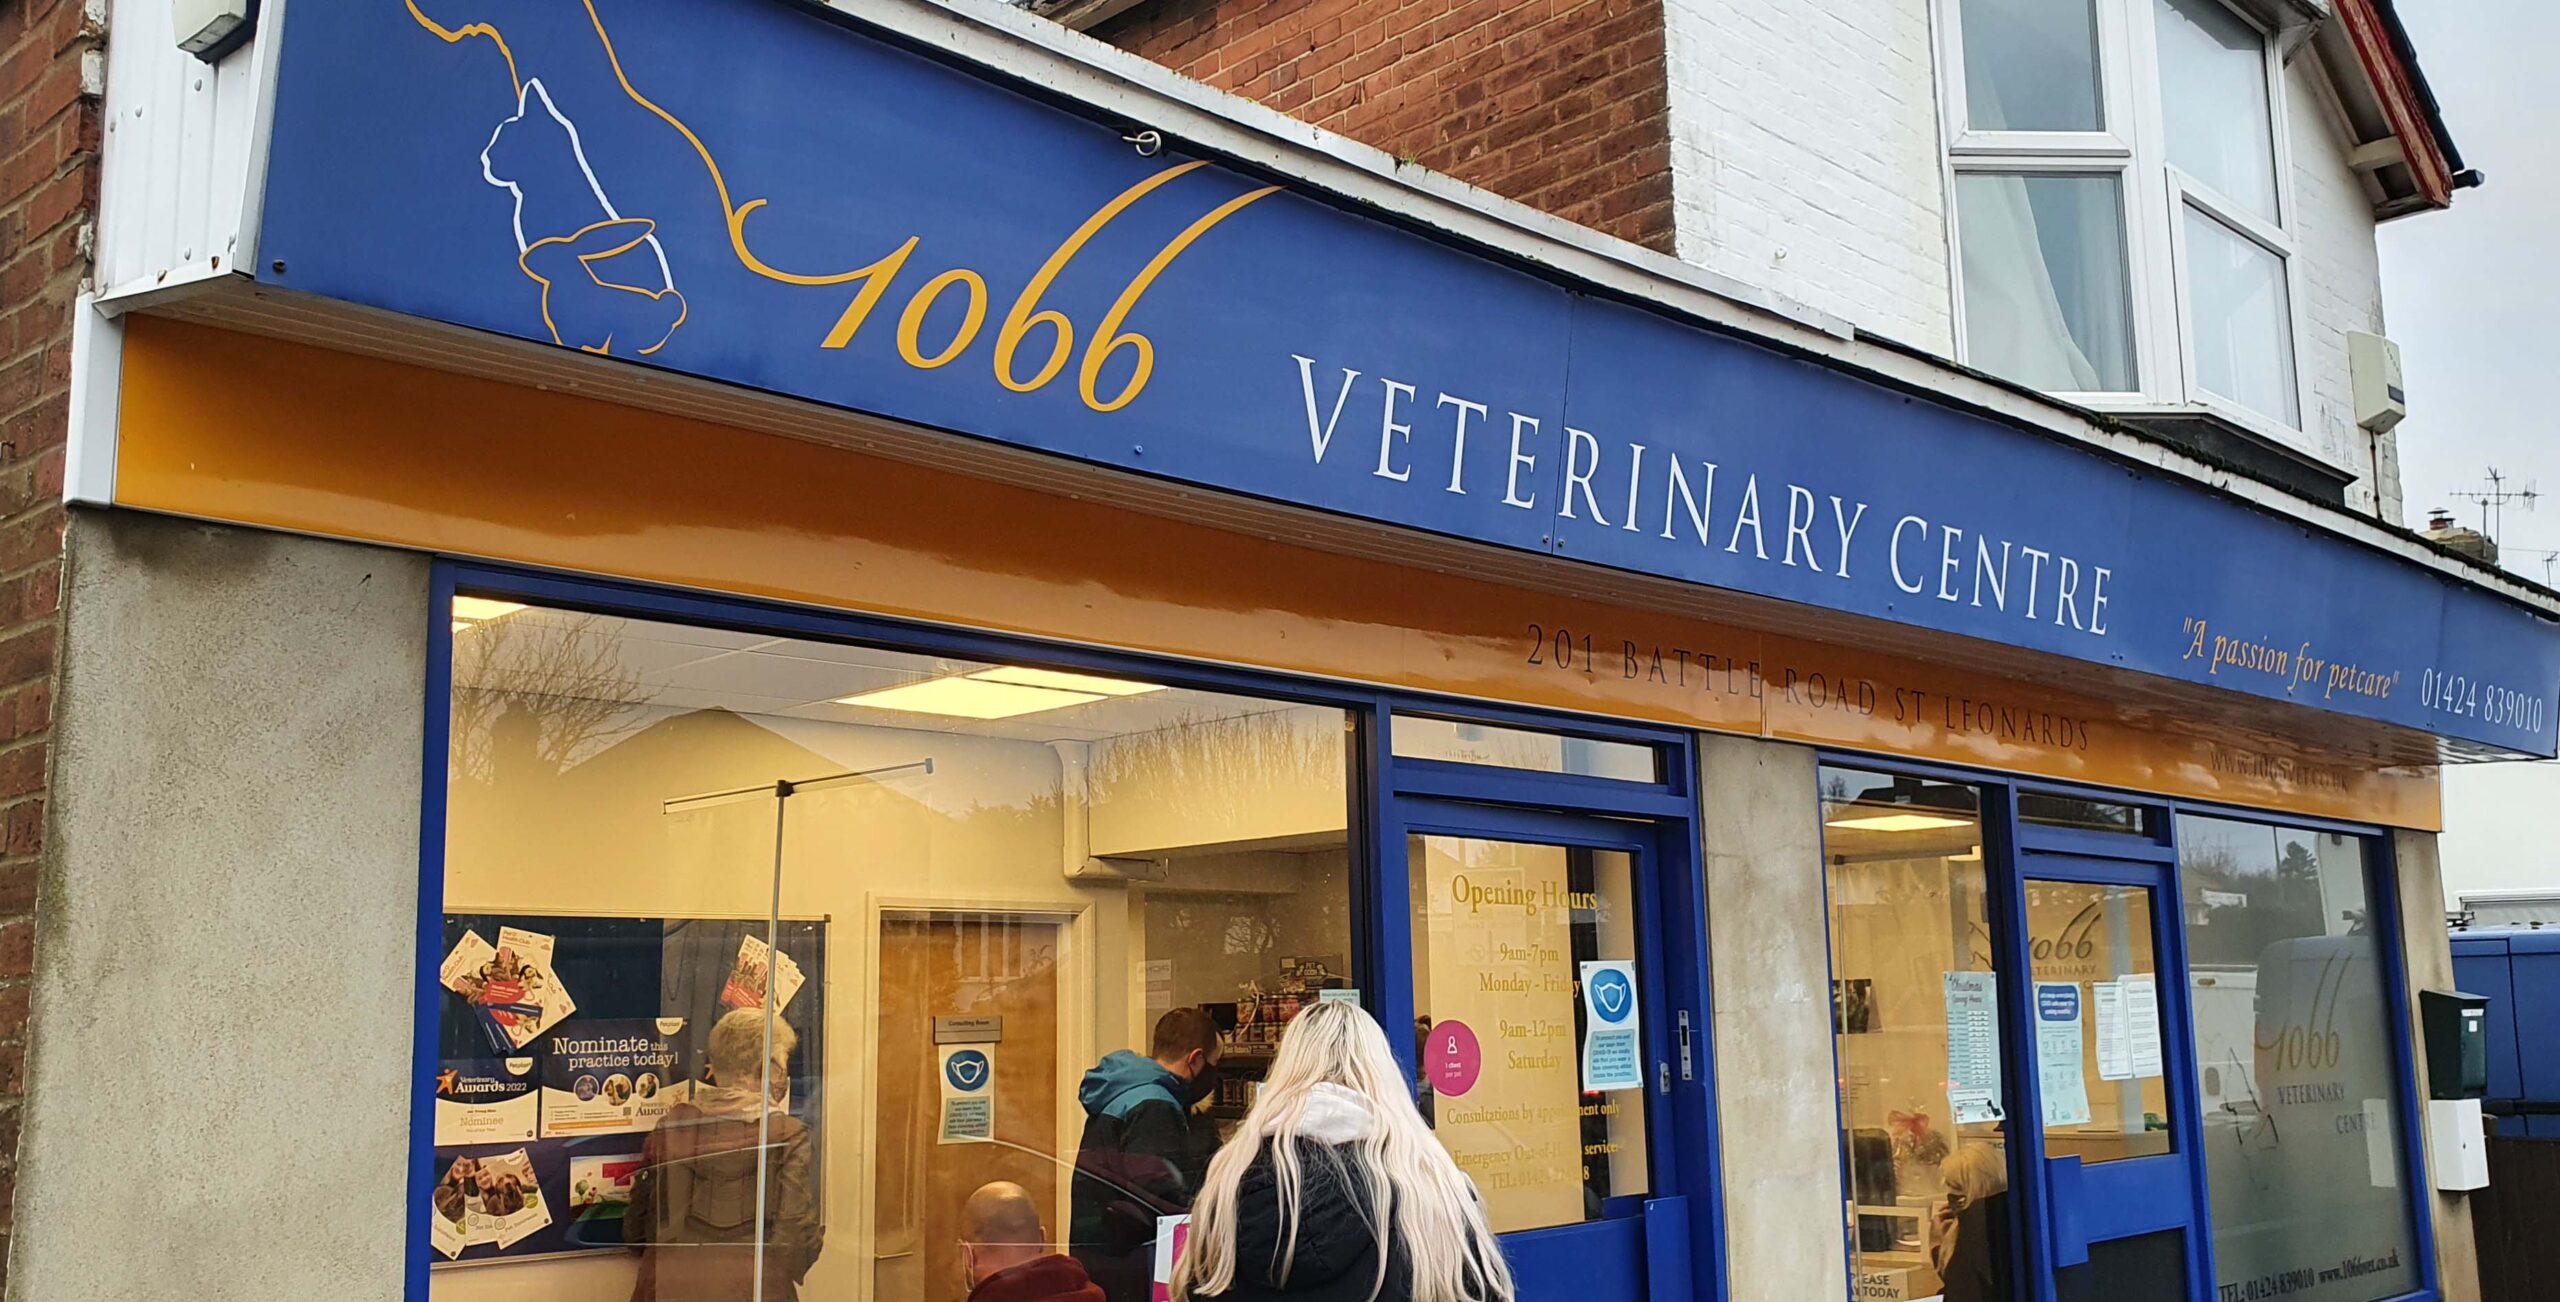 10066 vet a passion for petcare and compassion for animals